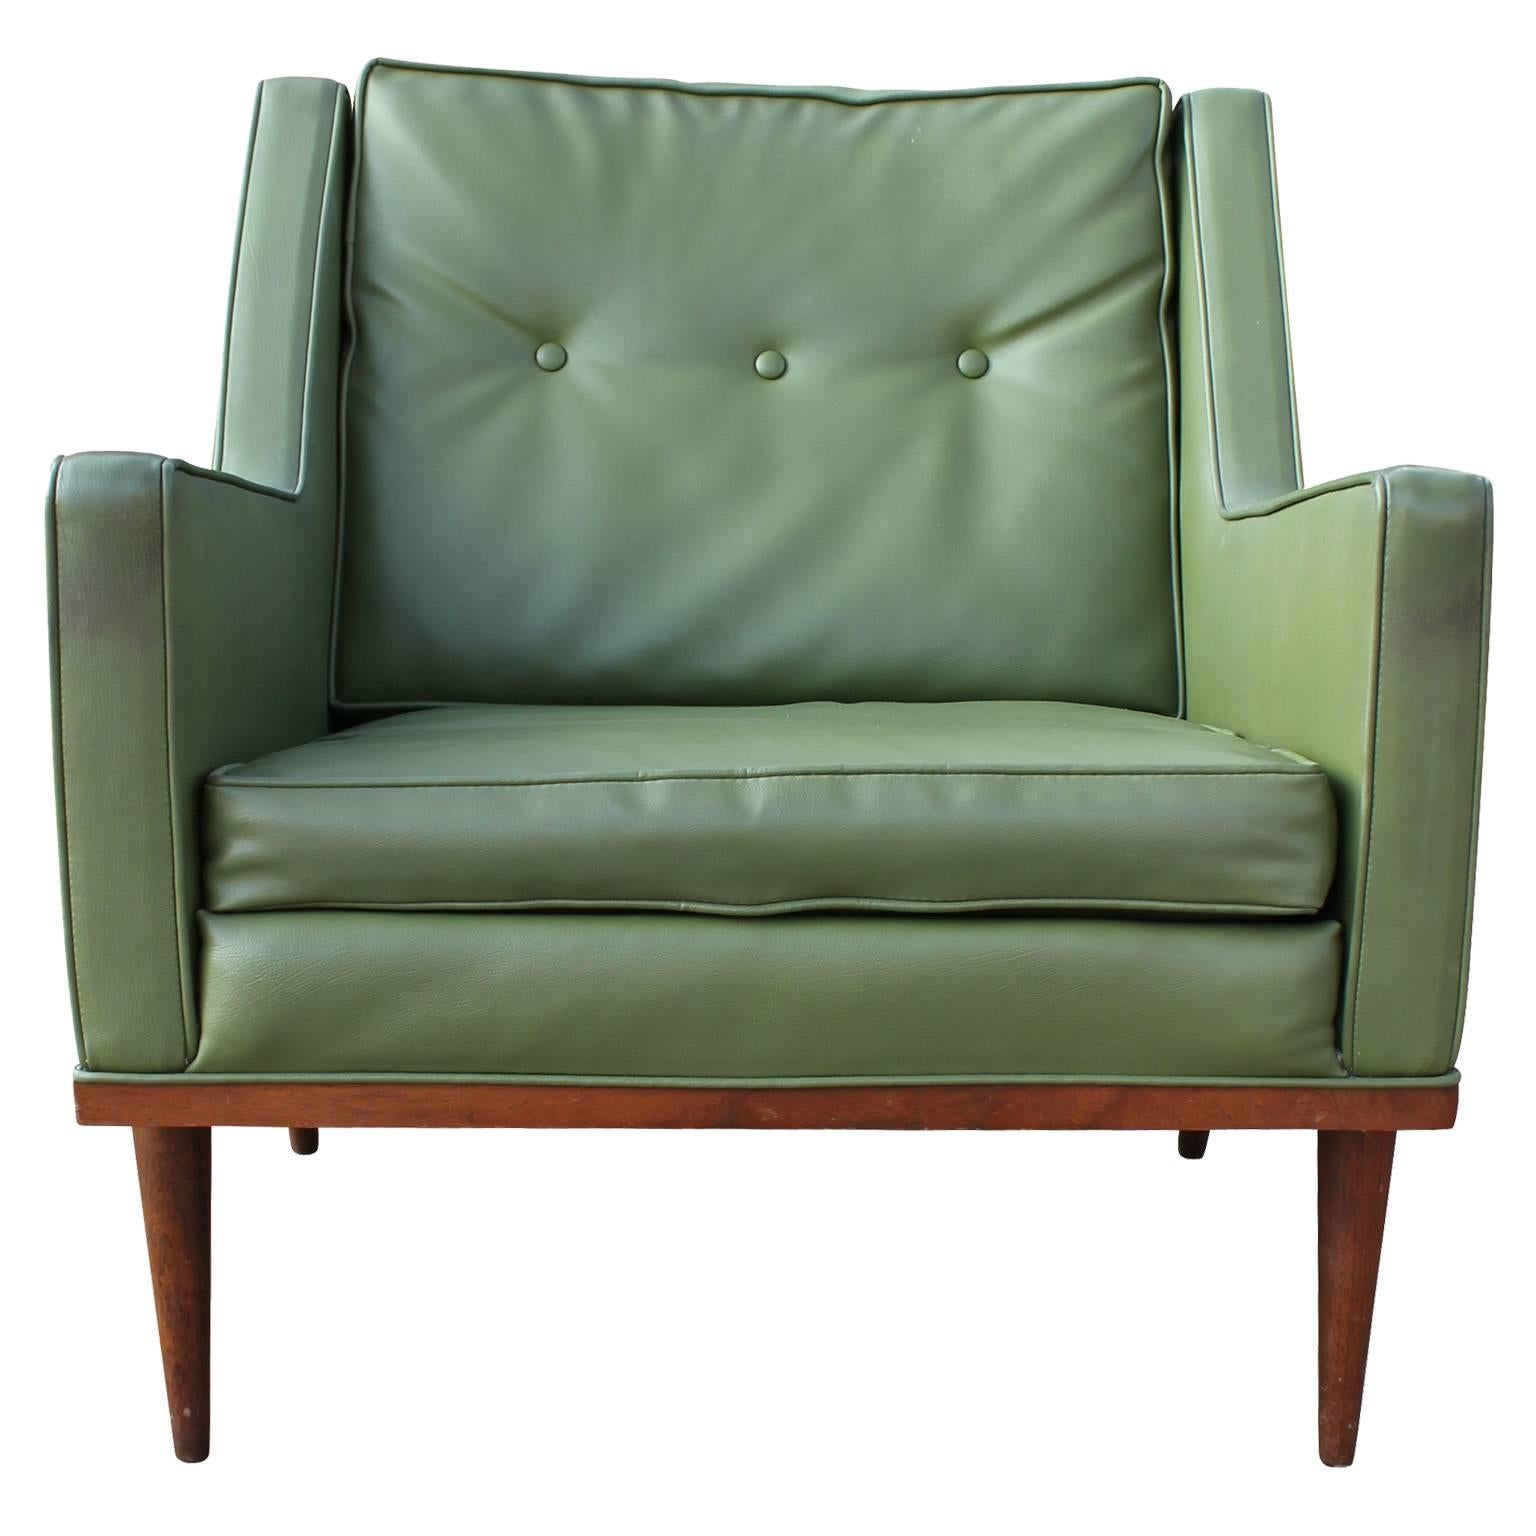 Early pair of Milo Baughman lounge chairs for Thayer Coggin / James Inc Chairs retains both a James Inc. label and Thayer Coggin label. Chairs are in original green vinyl. On chair has a small tear- Updated upholstery is recommended. 